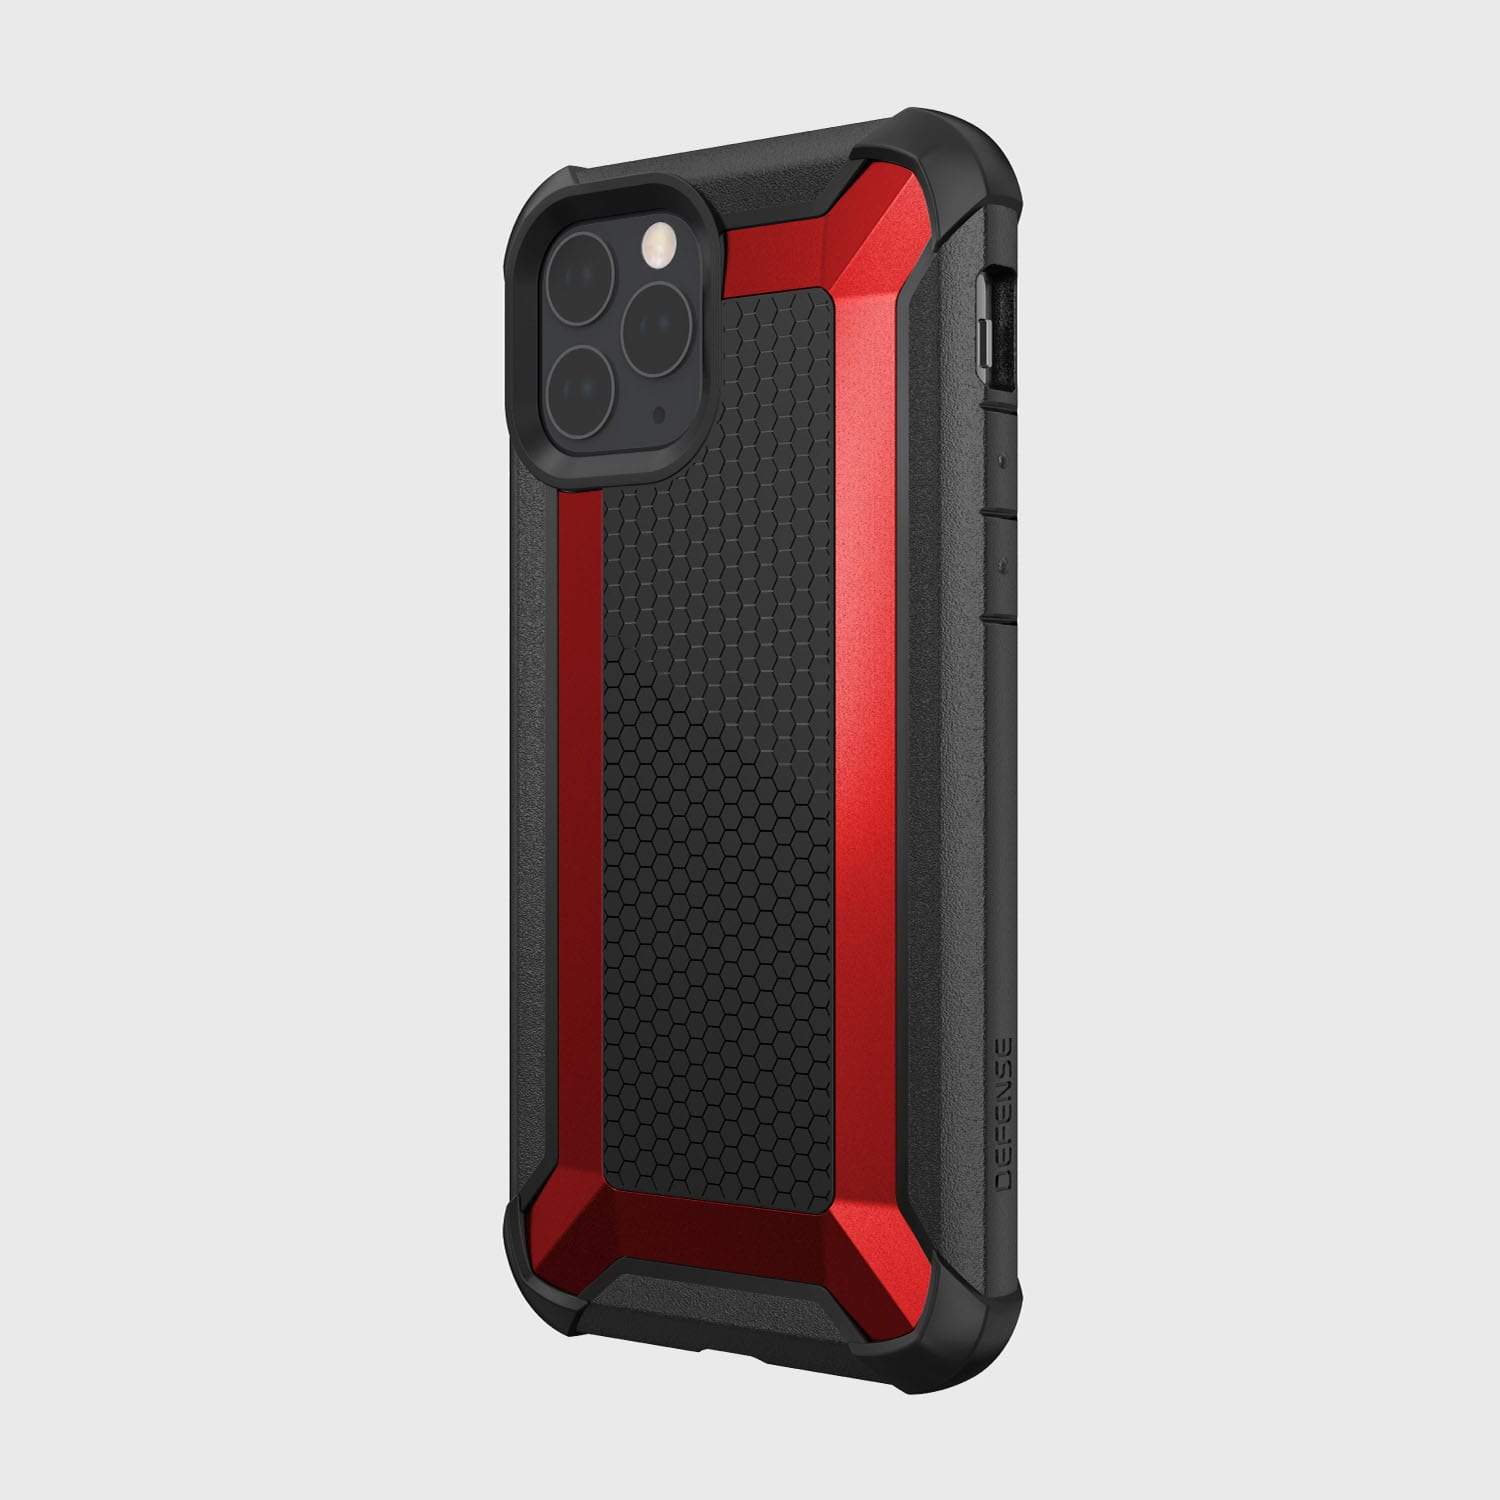 The iPhone 11 Pro case - TACTICAL by Raptic is black and red, providing a protective and shock-absorbing design.